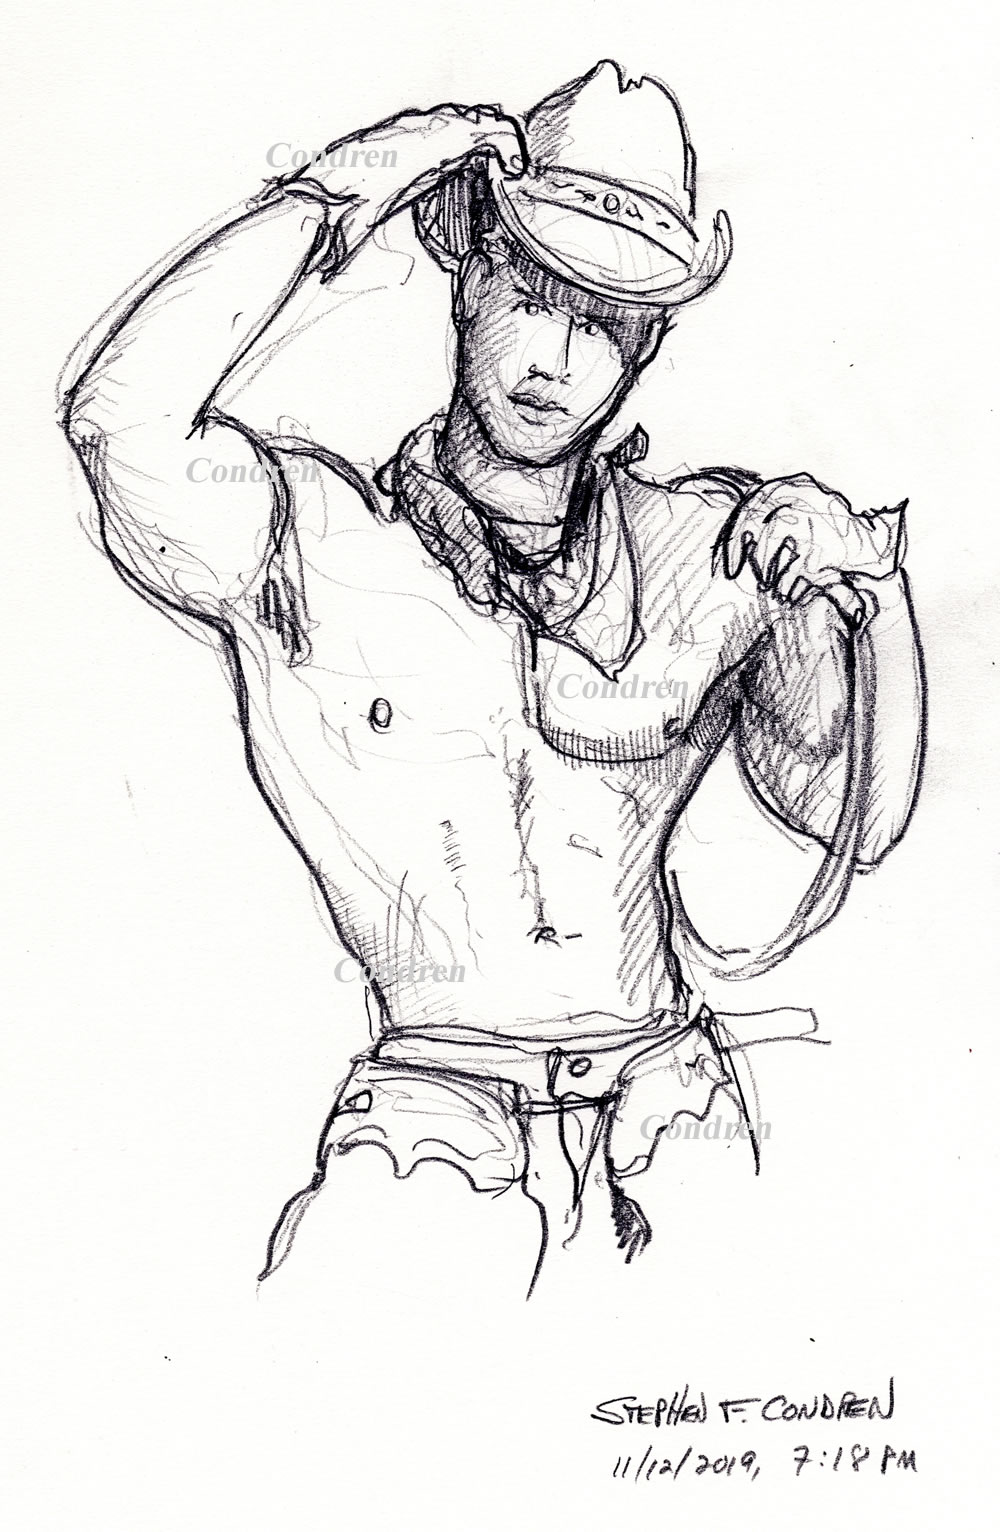 Hot shirtless cowboy #344Z pencil figure by artist Stephen F. Condren, with LGBTQ endorsed gay prints, and scans.